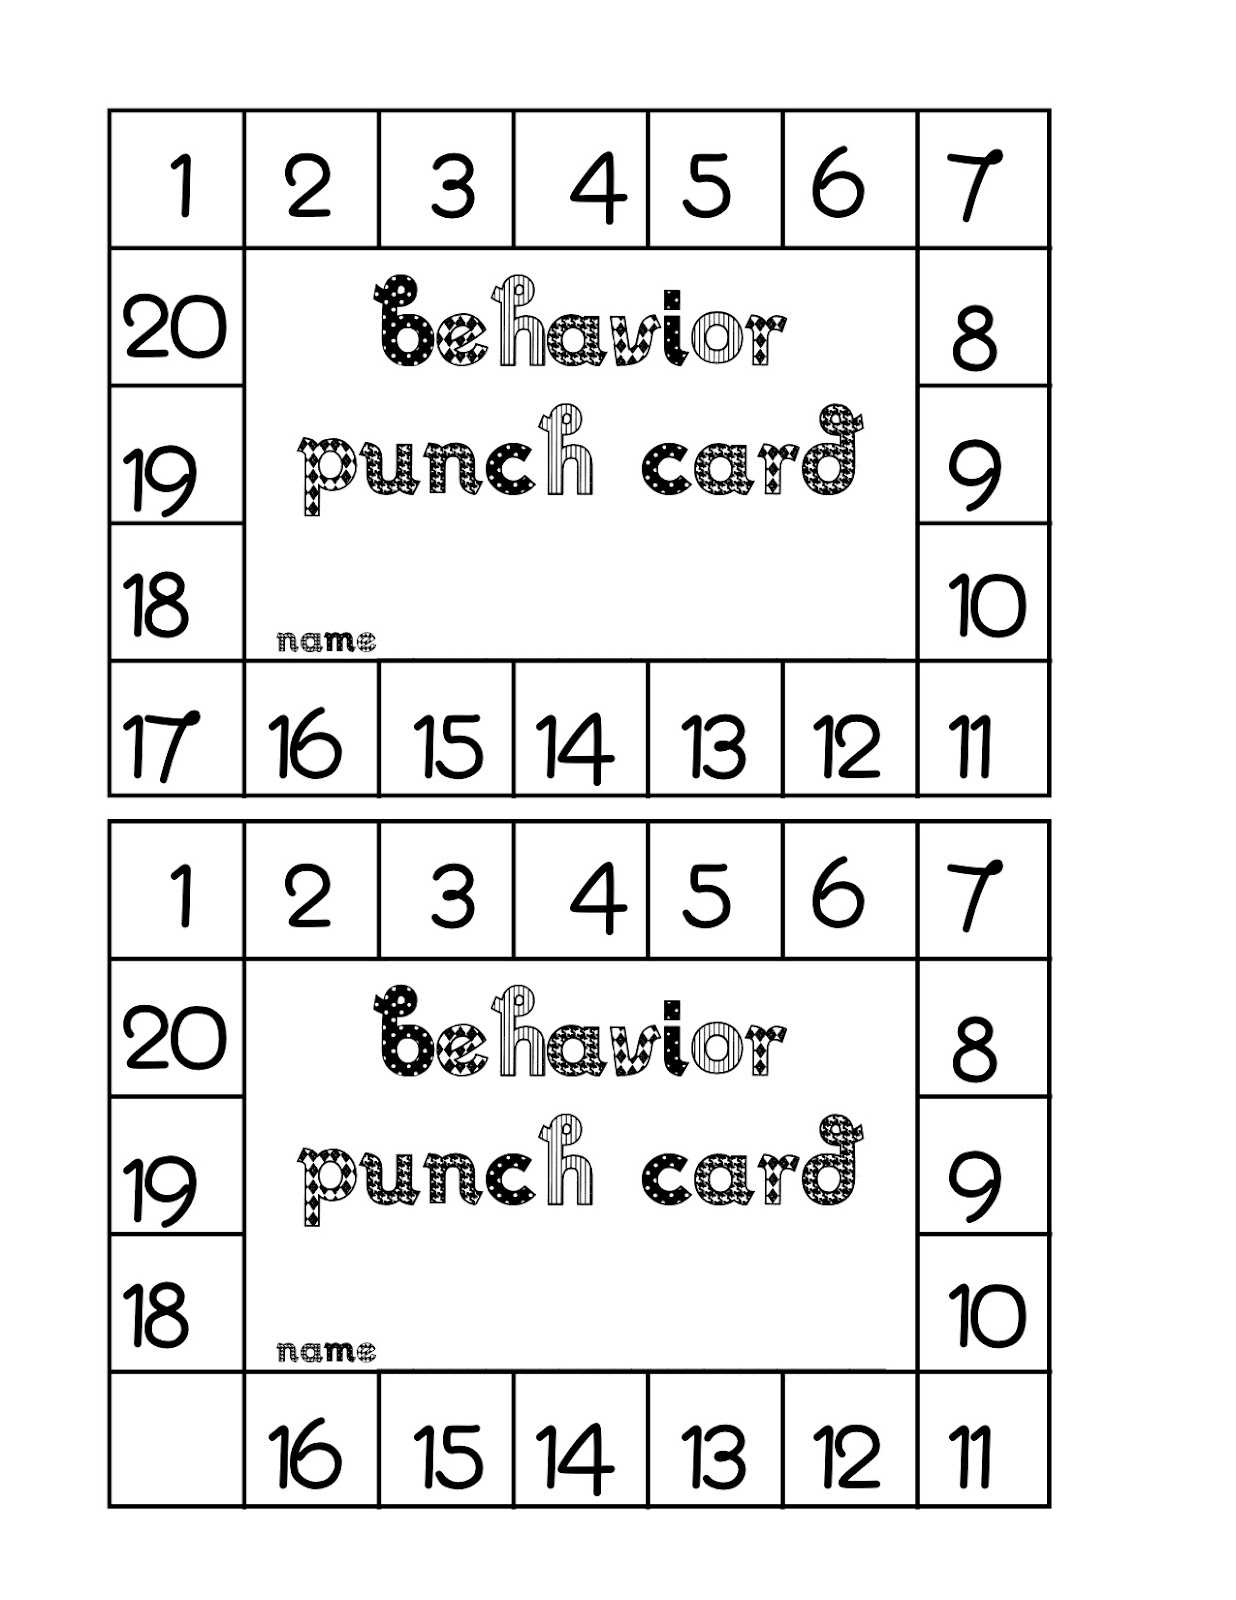 Punch Card Template Free ] - Free Printable Punch Card In Free Printable Punch Card Template